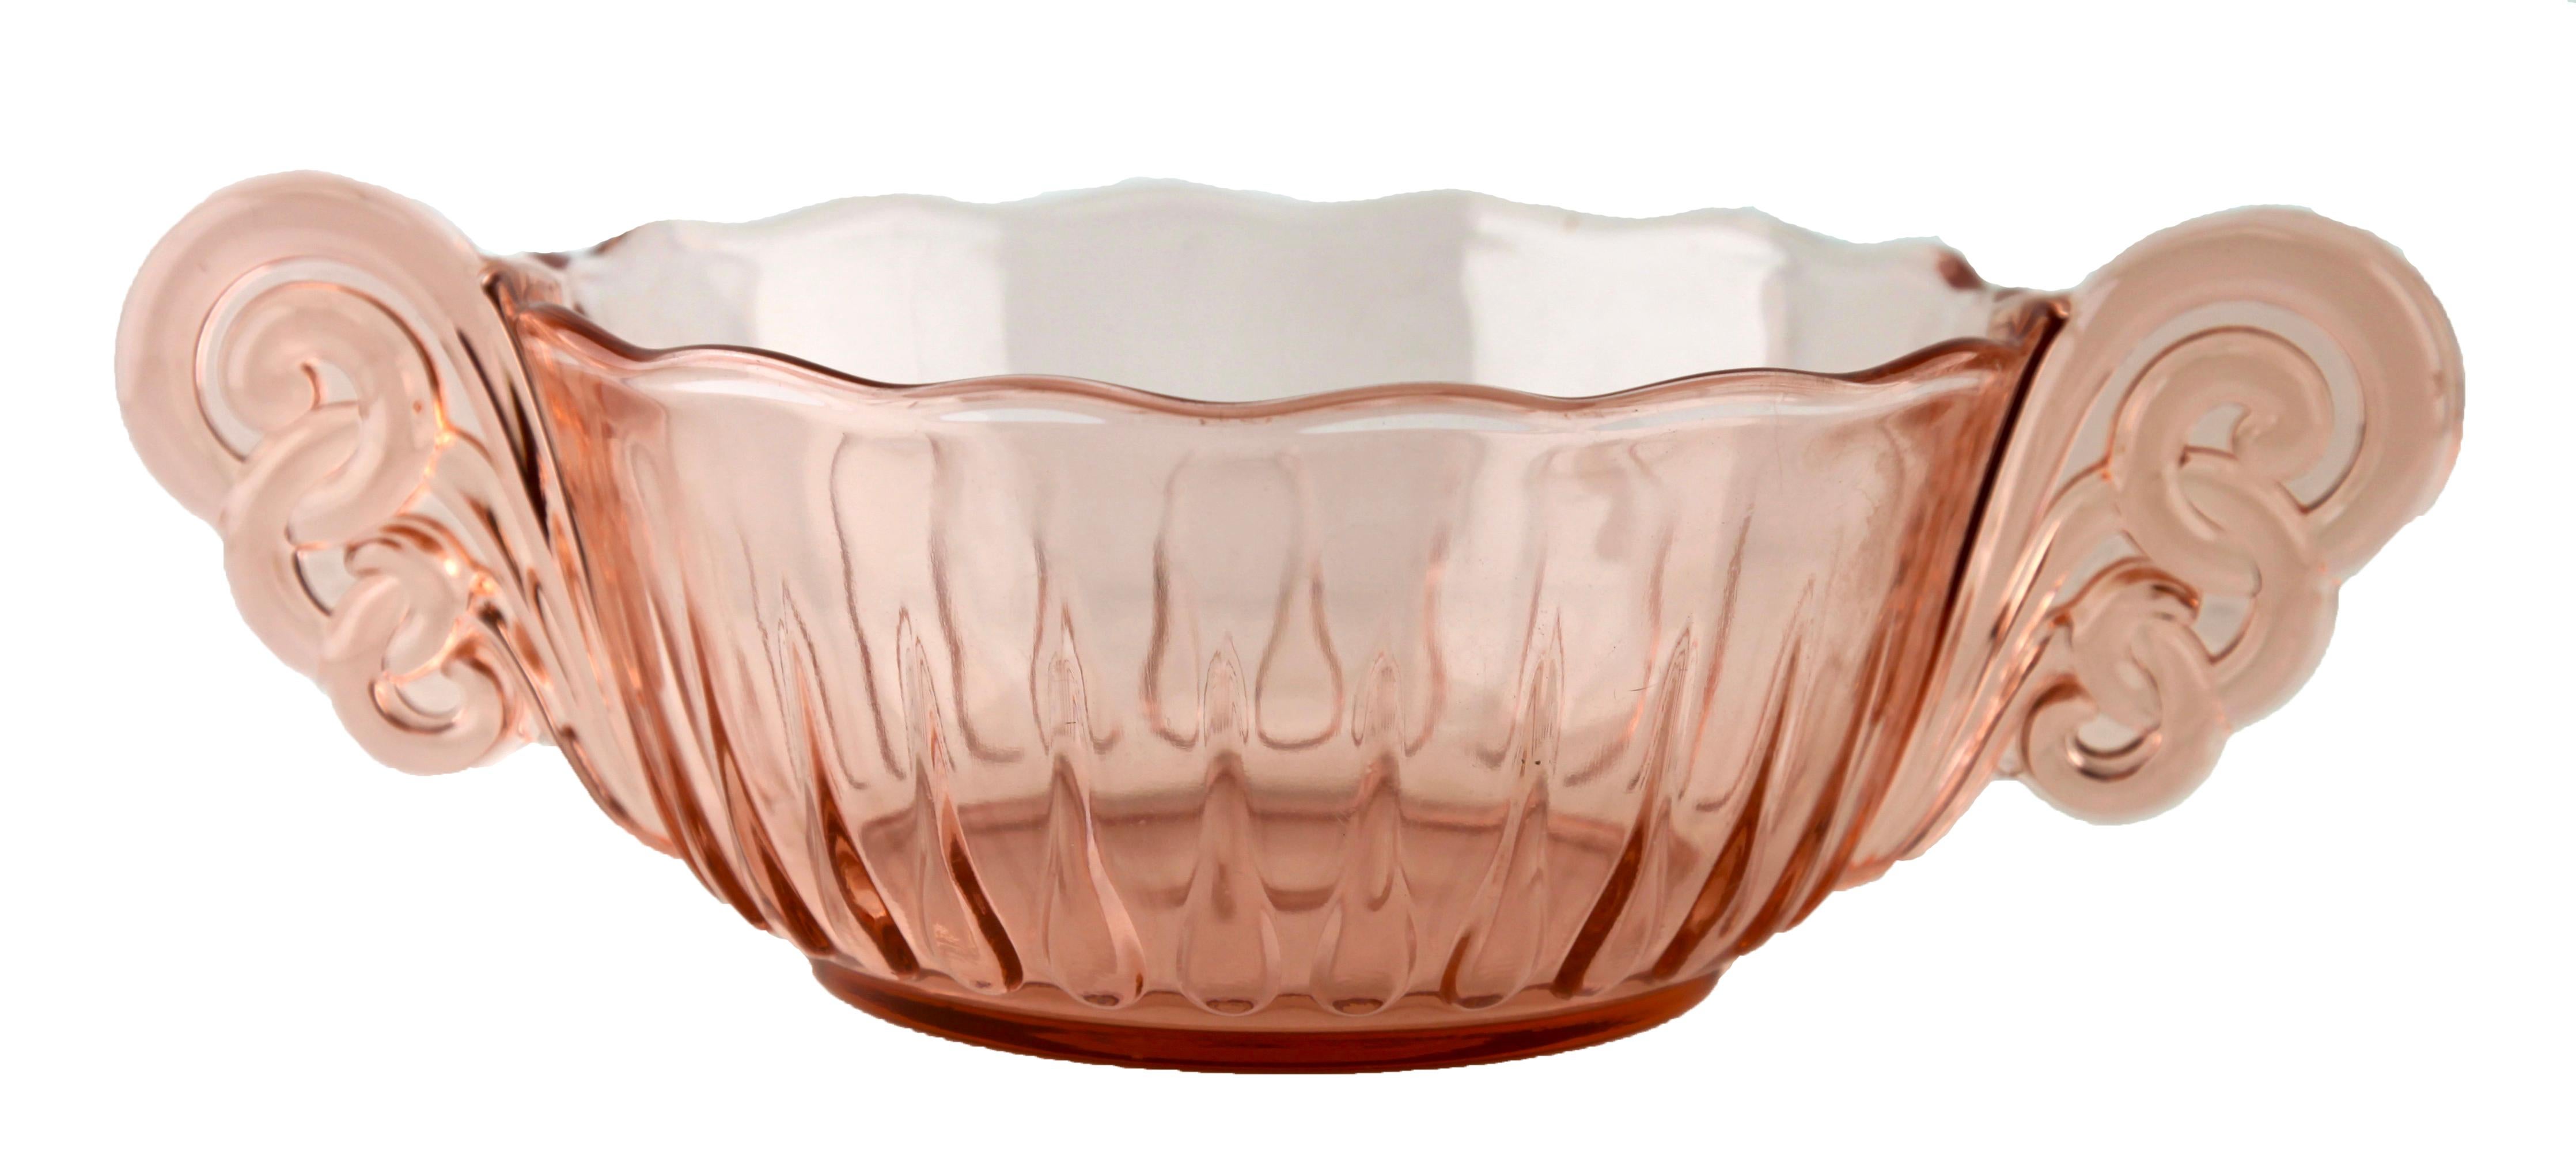 Very beautiful and large Art Deco coupe in rose (rosaline) color made by Val St Lambert. It is the Gervaise model of the Luxval series and was made in 1935 (see attached photos of the catalog). « Val St Lambert Belgique » pressed into the glass